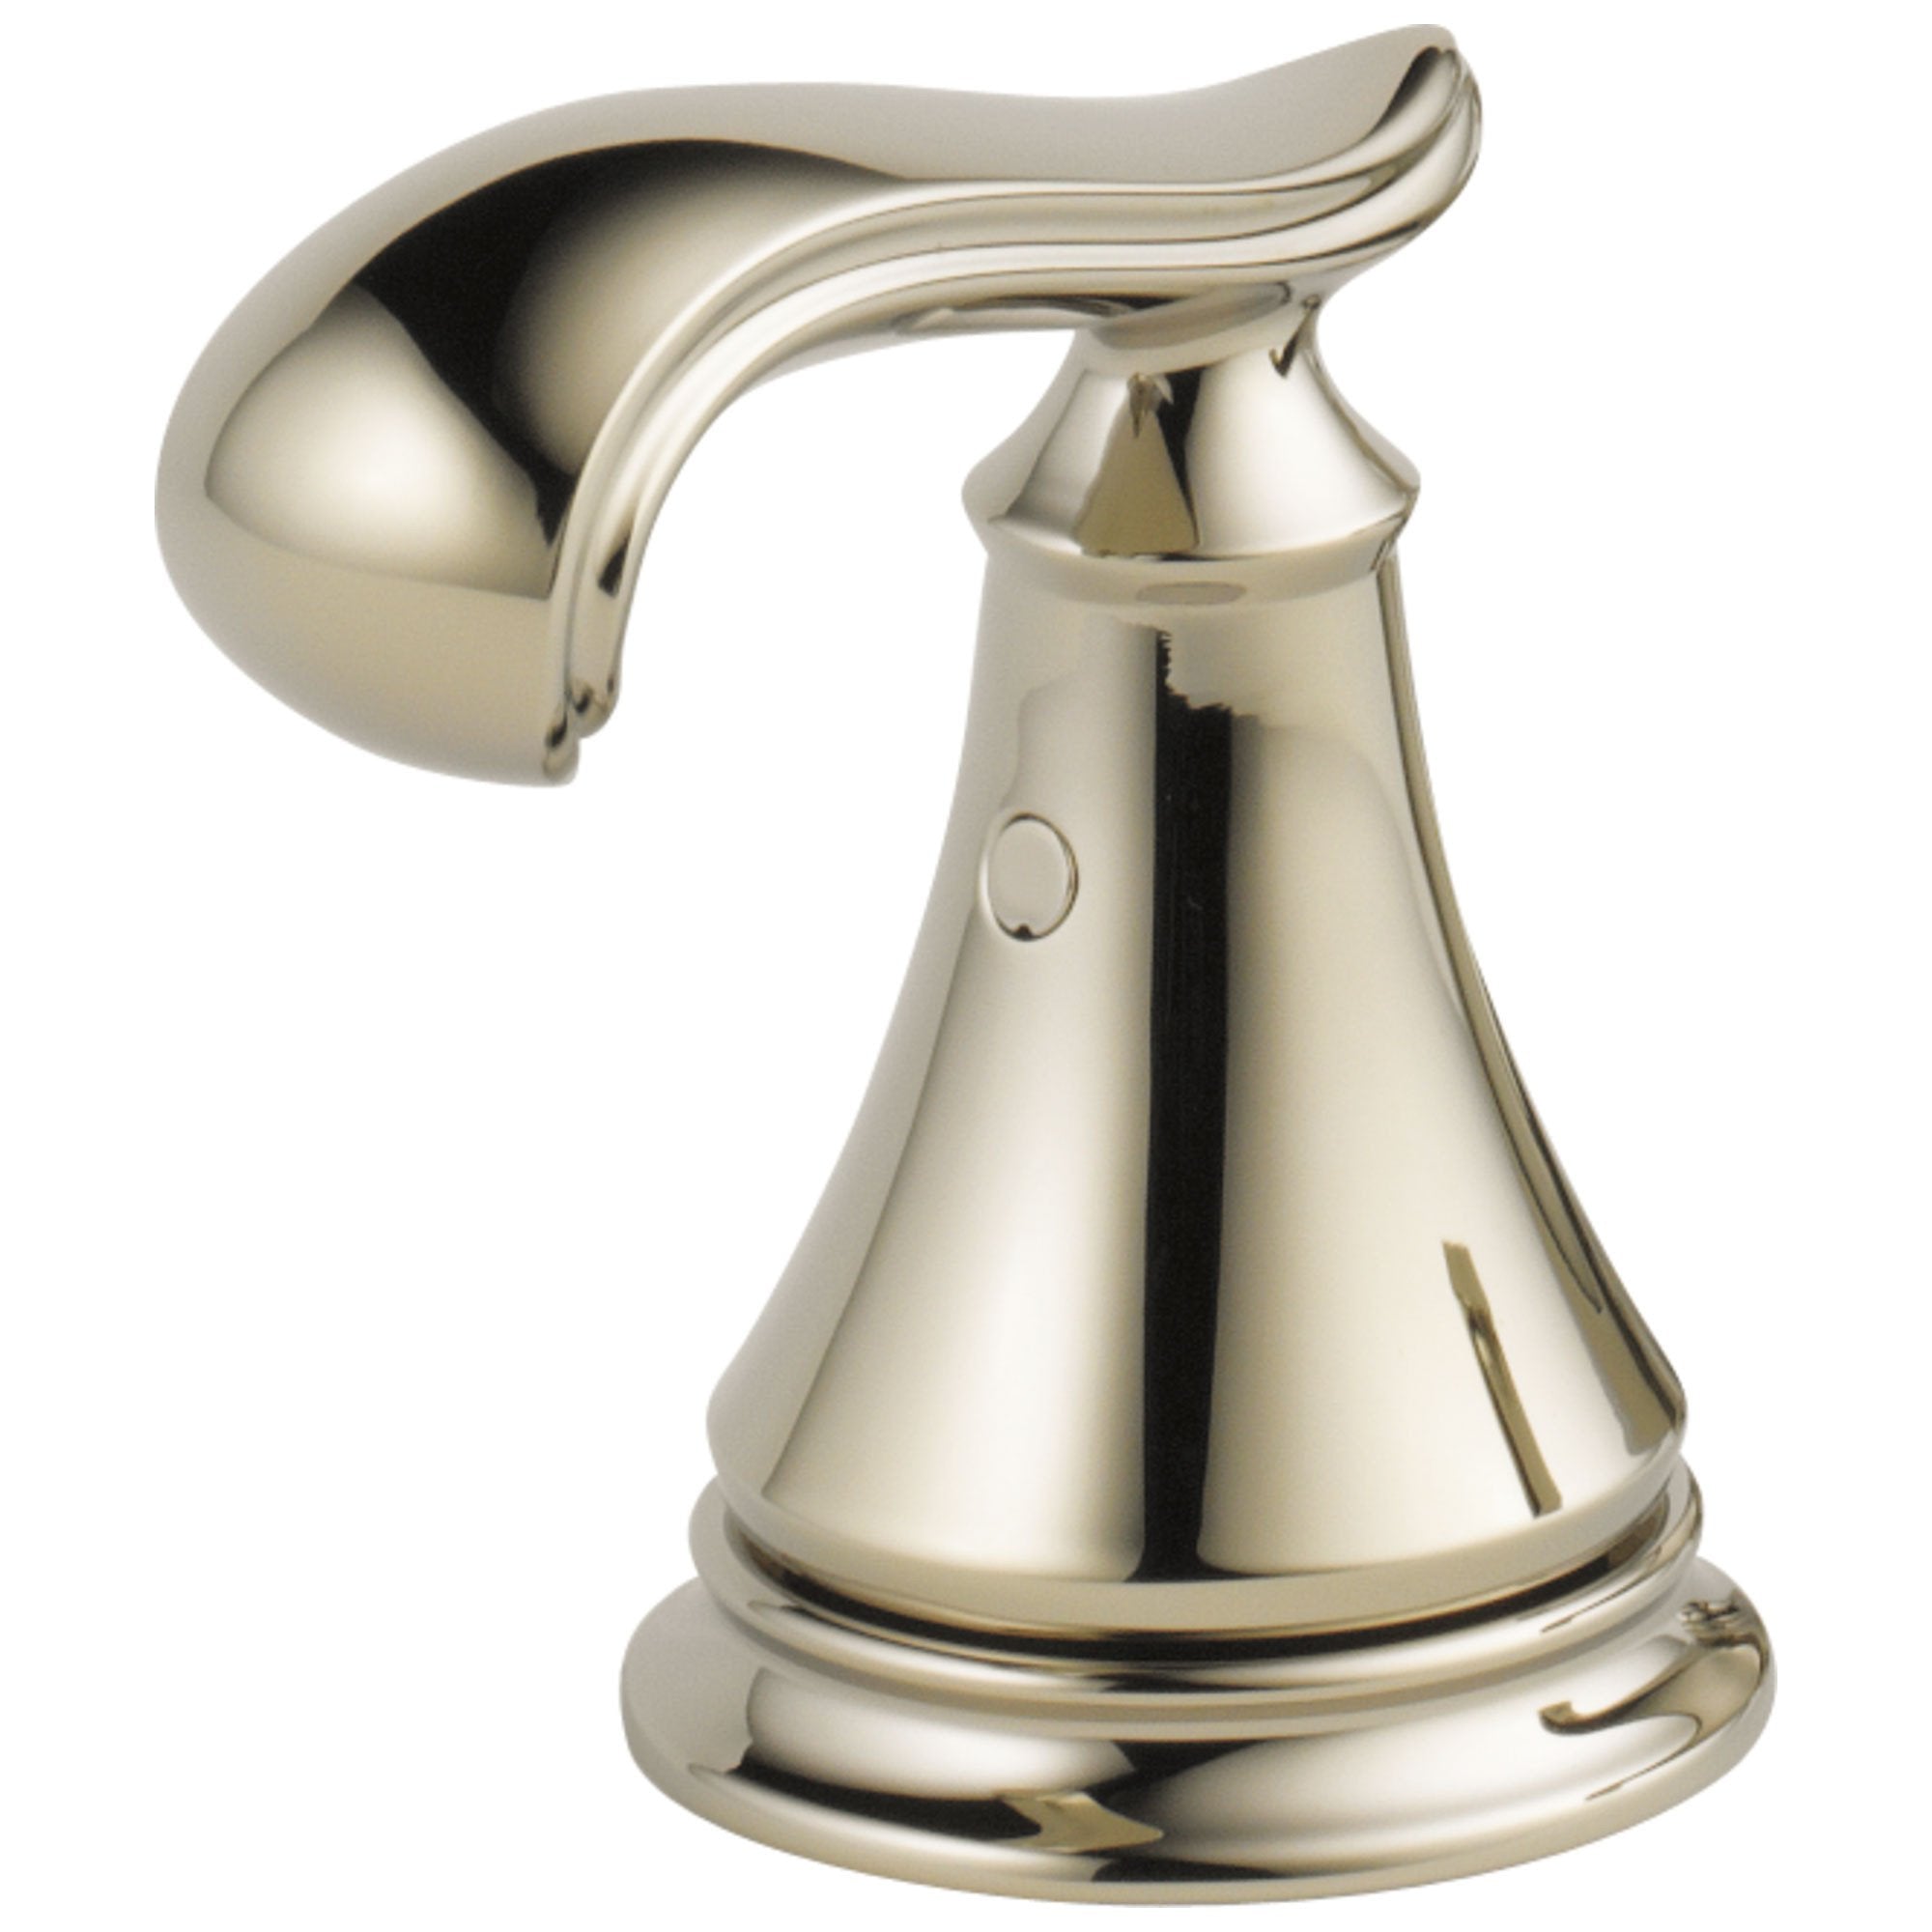 Delta Cassidy Collection Polished Nickel Finish Lavatory French Curve Handles - Quantity 2 Included DH298PN